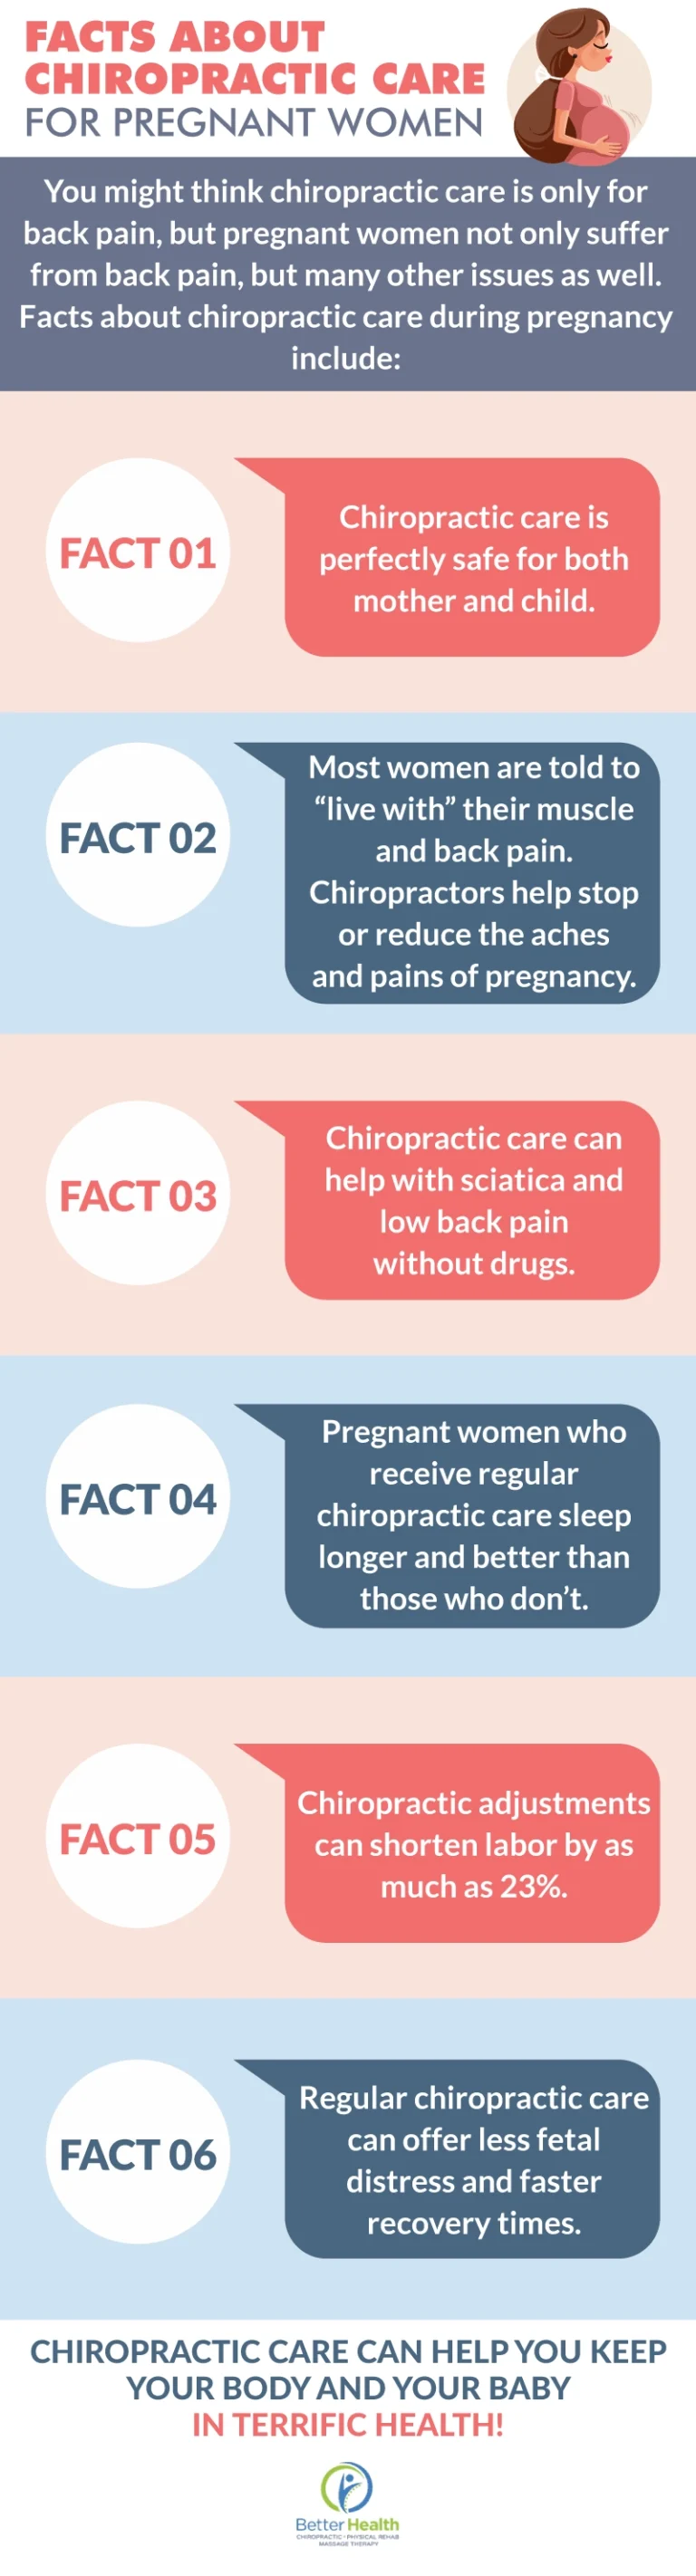 An infographic about chiropractic for pregnant women.